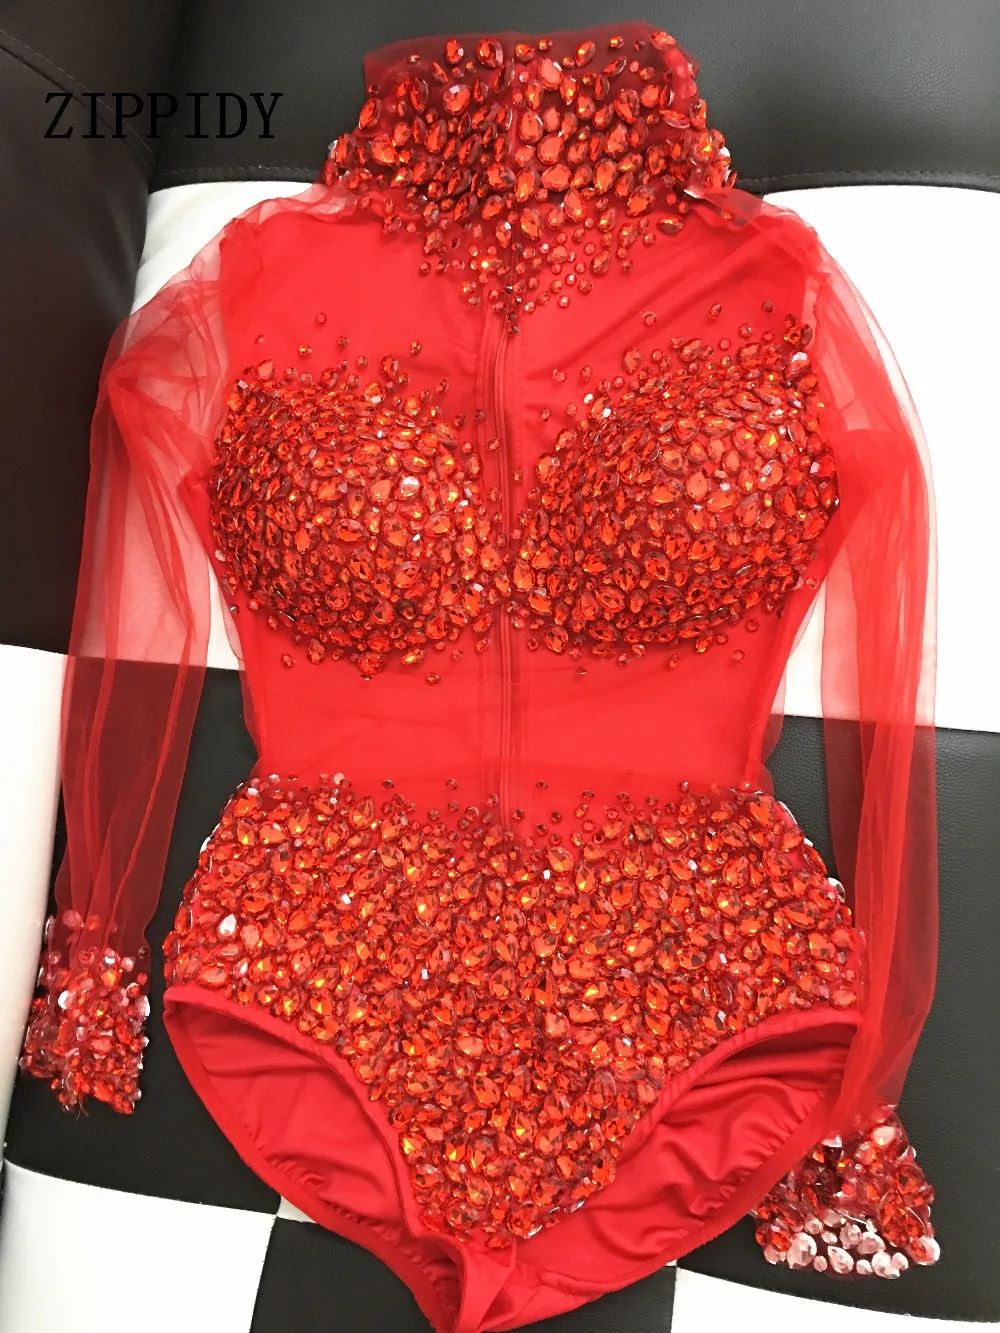 Nice Stage Wear Bodysuit Rhinestone Costume Perspectivite Prom Wear Clothing Nightclub Party Dance Outfit Show Costumes